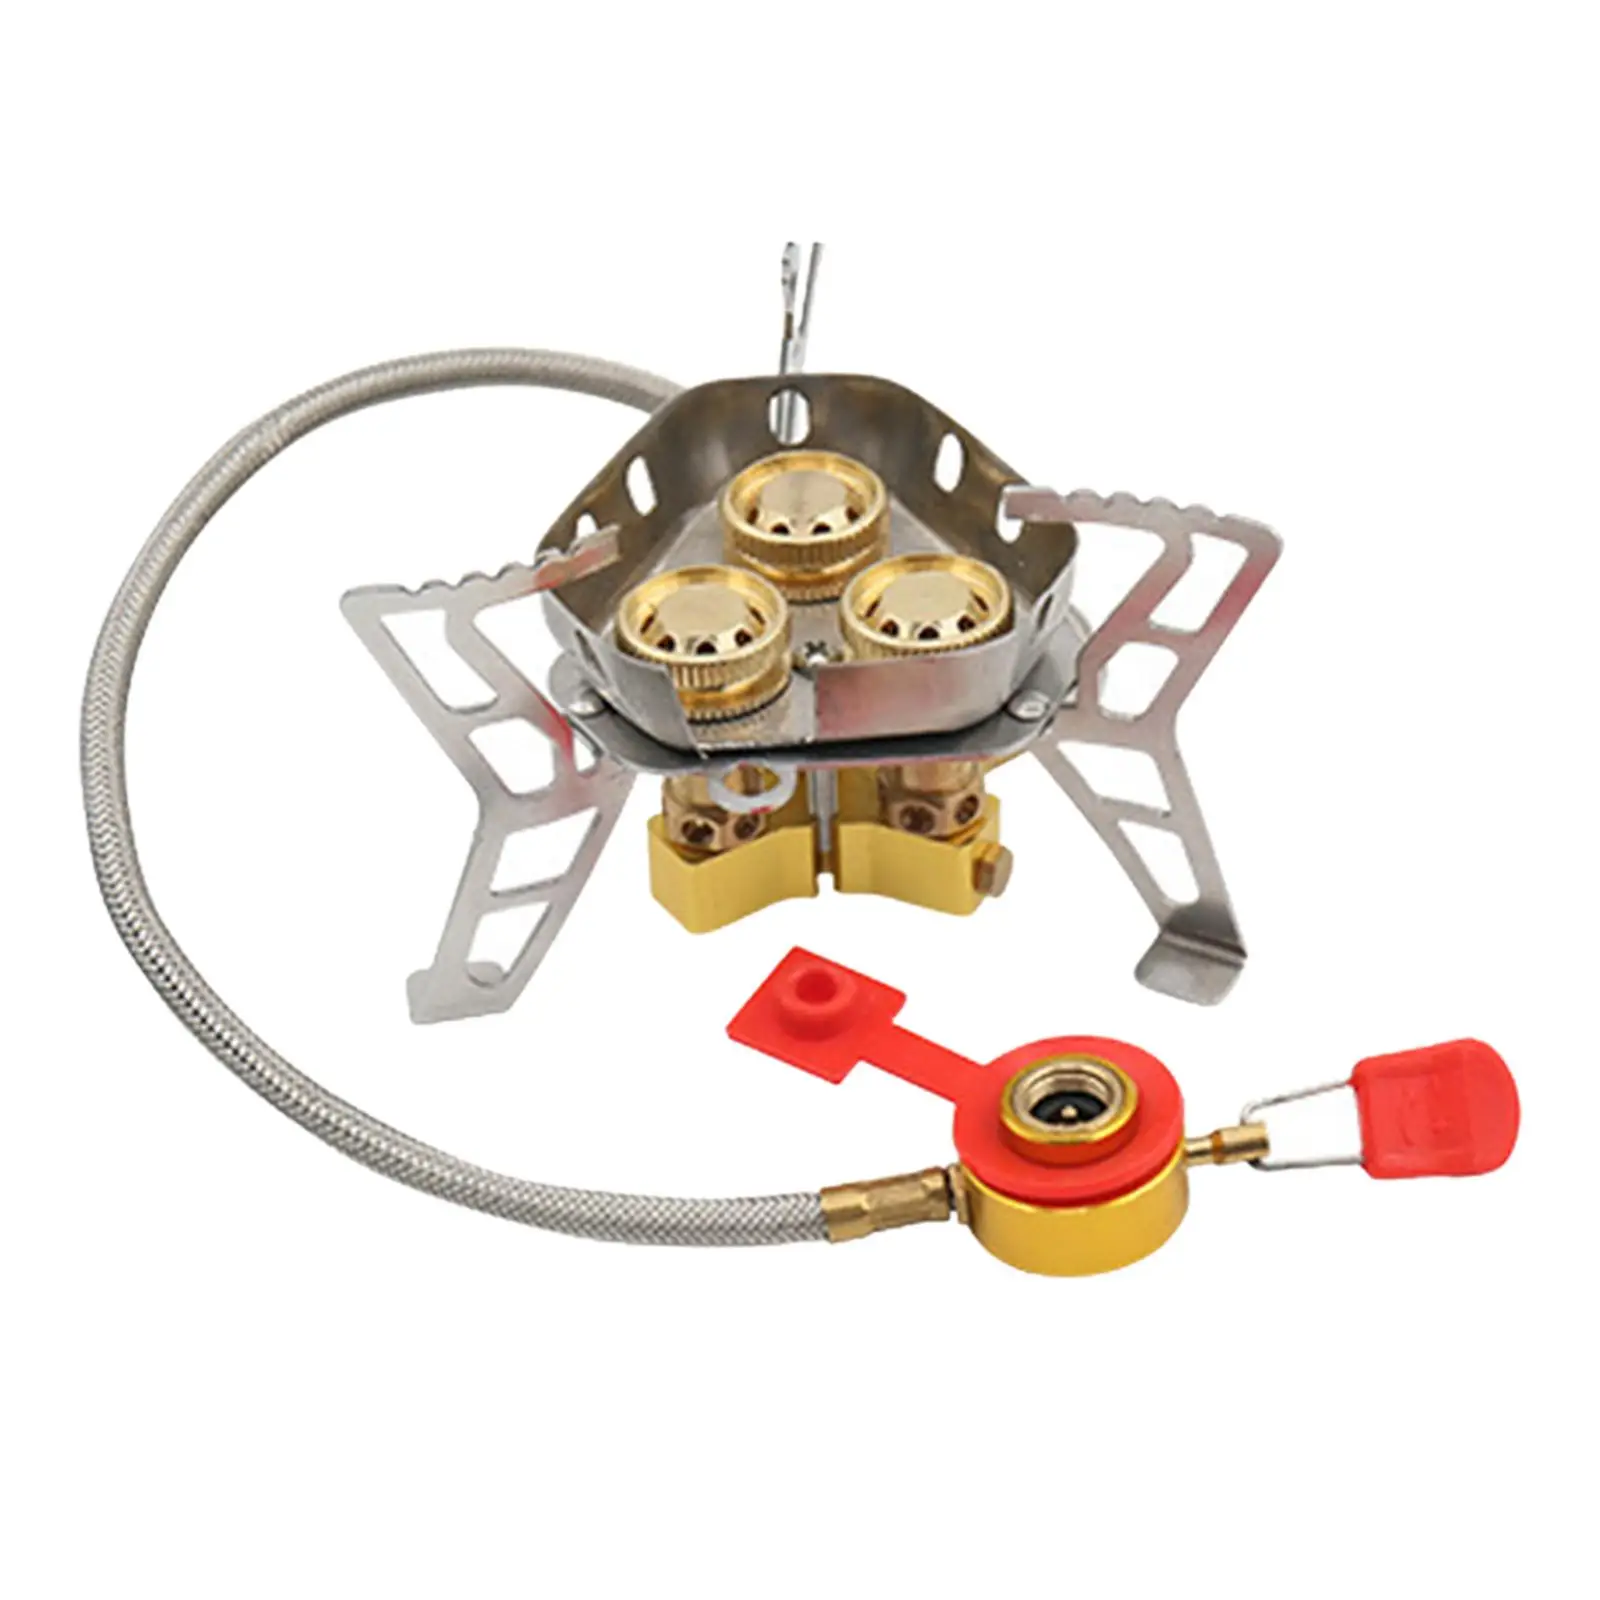 Portable Camping Gas Stove Cooker Gear Ultralight Adjustable Folding Stove Burner for Fishing Backpacking Hotel Hiking Outdoor